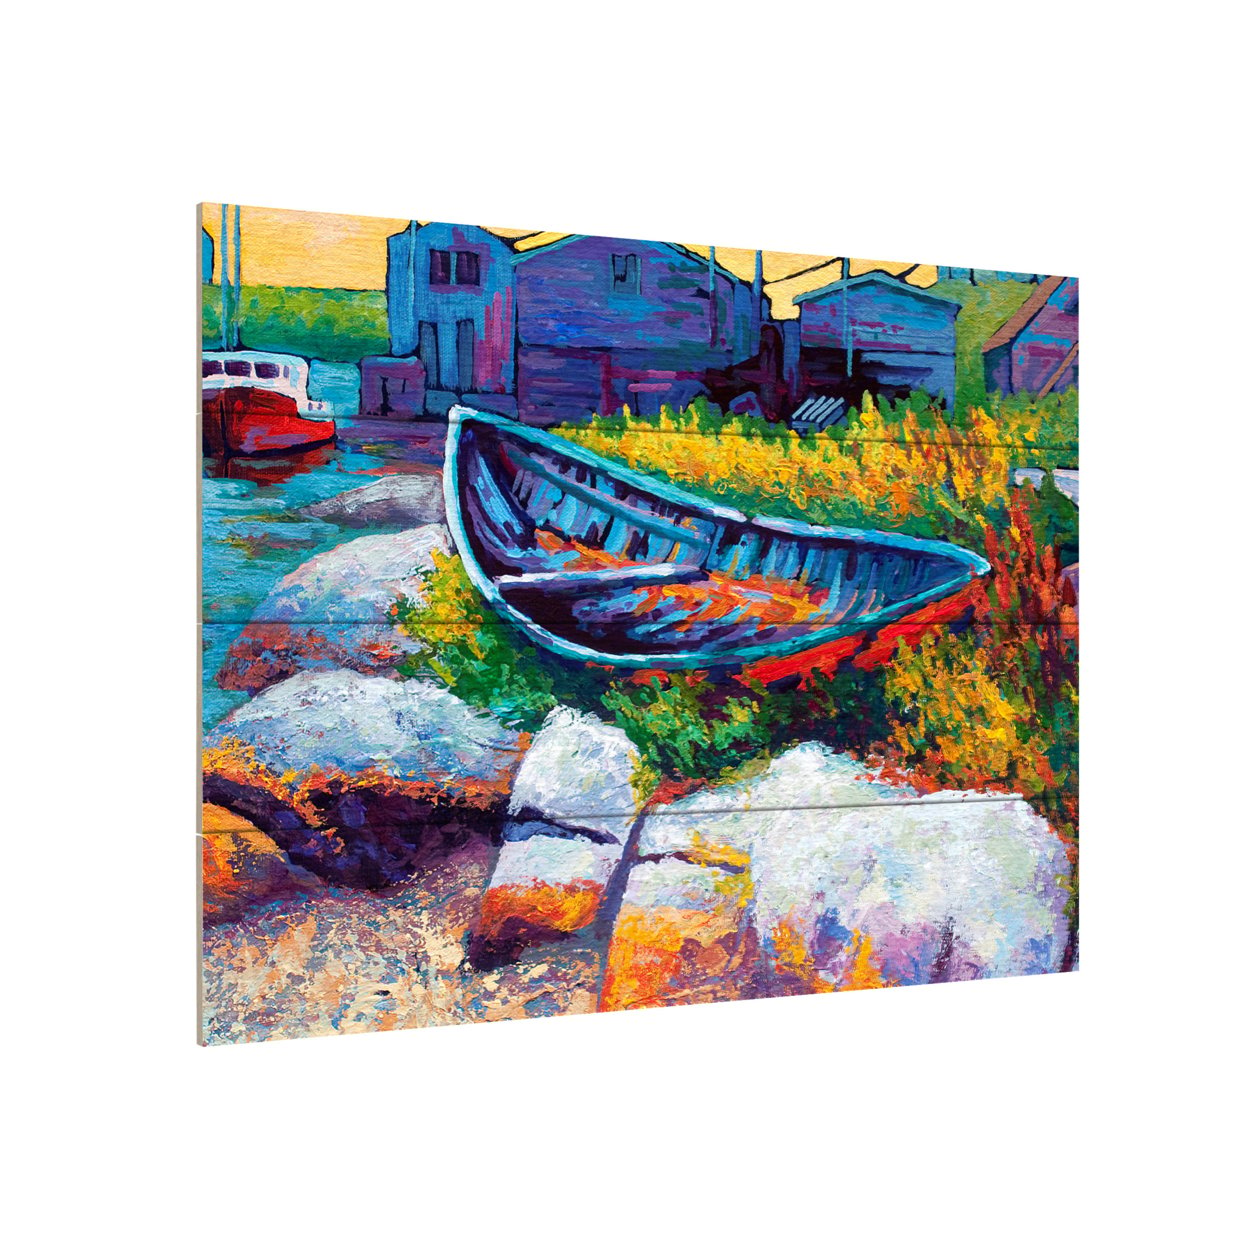 Wall Art 12 X 16 Inches Titled Judy East Coast Boat Faa Ready To Hang Printed On Wooden Planks